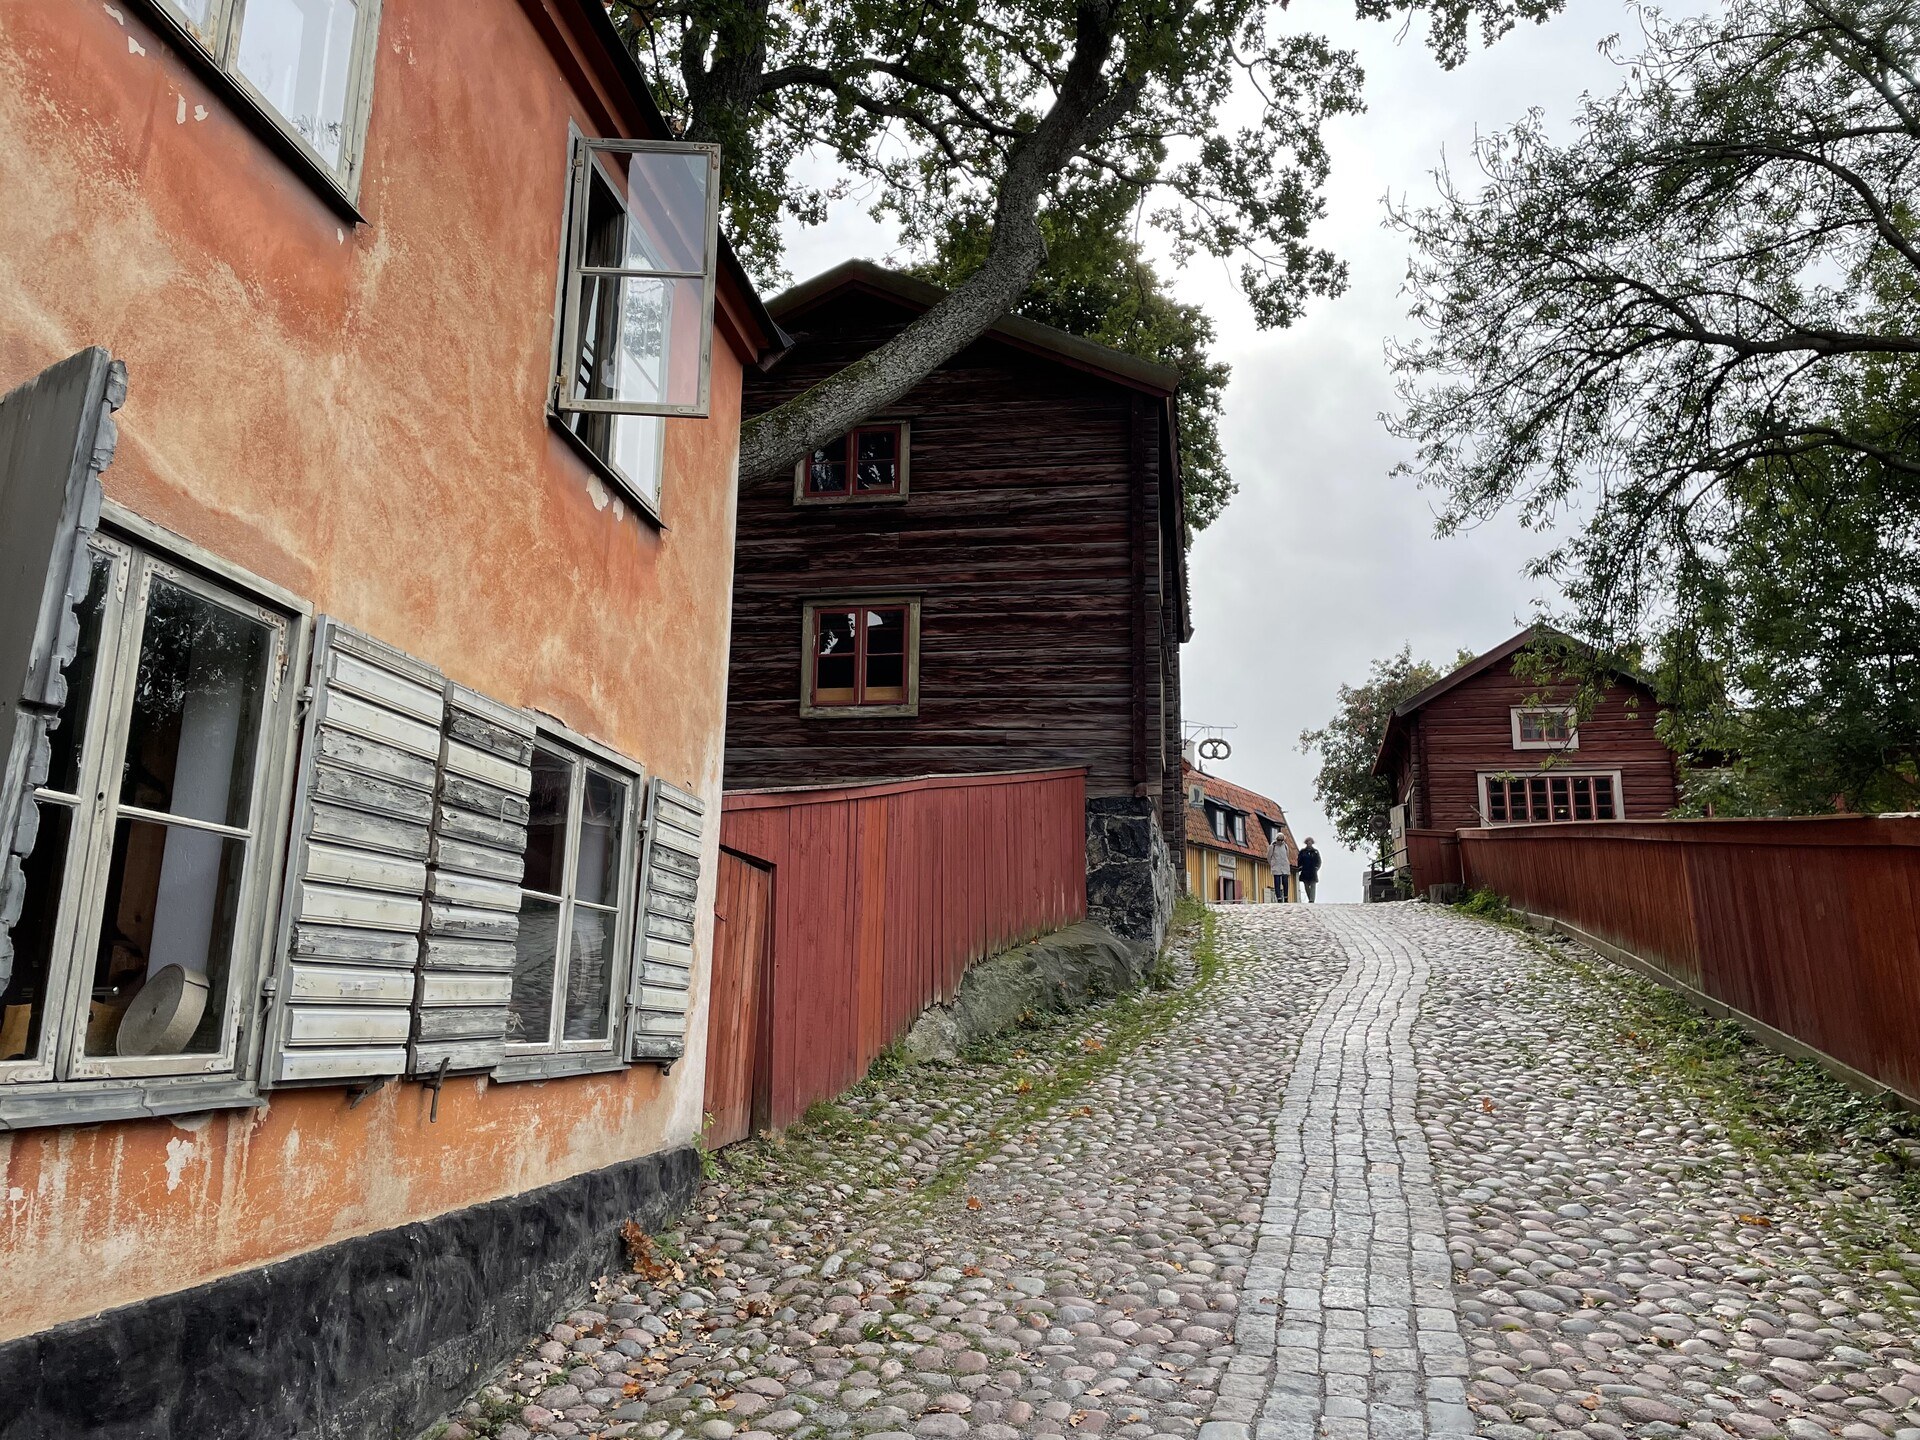 A cobblestone street heading up a hill with old houses on the left and a low fence on the right